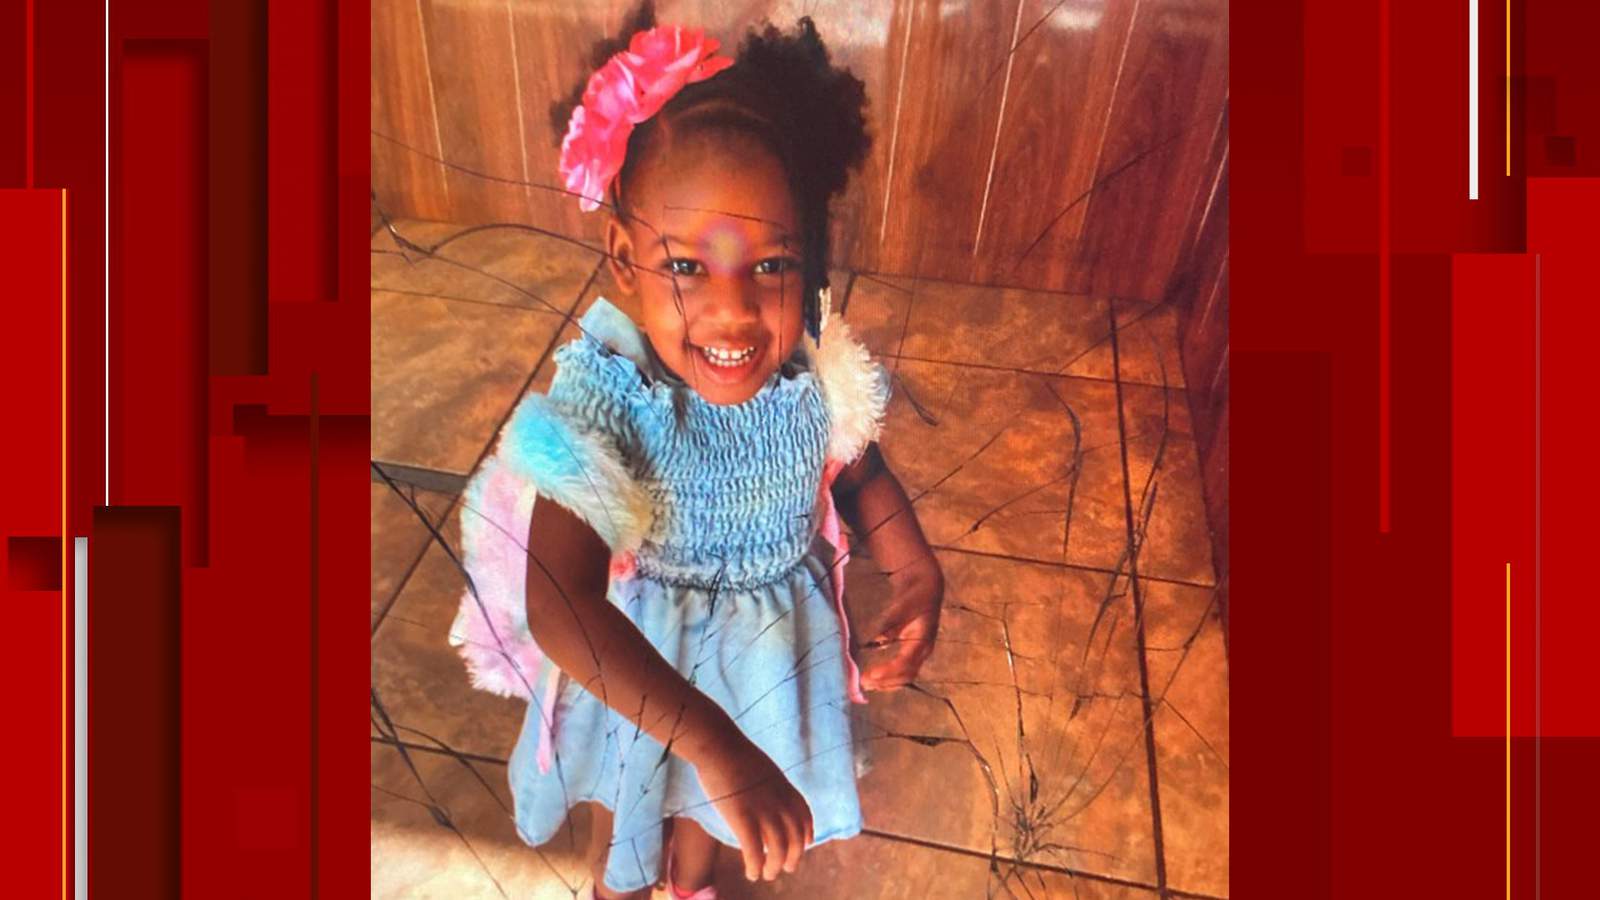 3-year-old girl stolen in car theft in Dallas found safe, police say